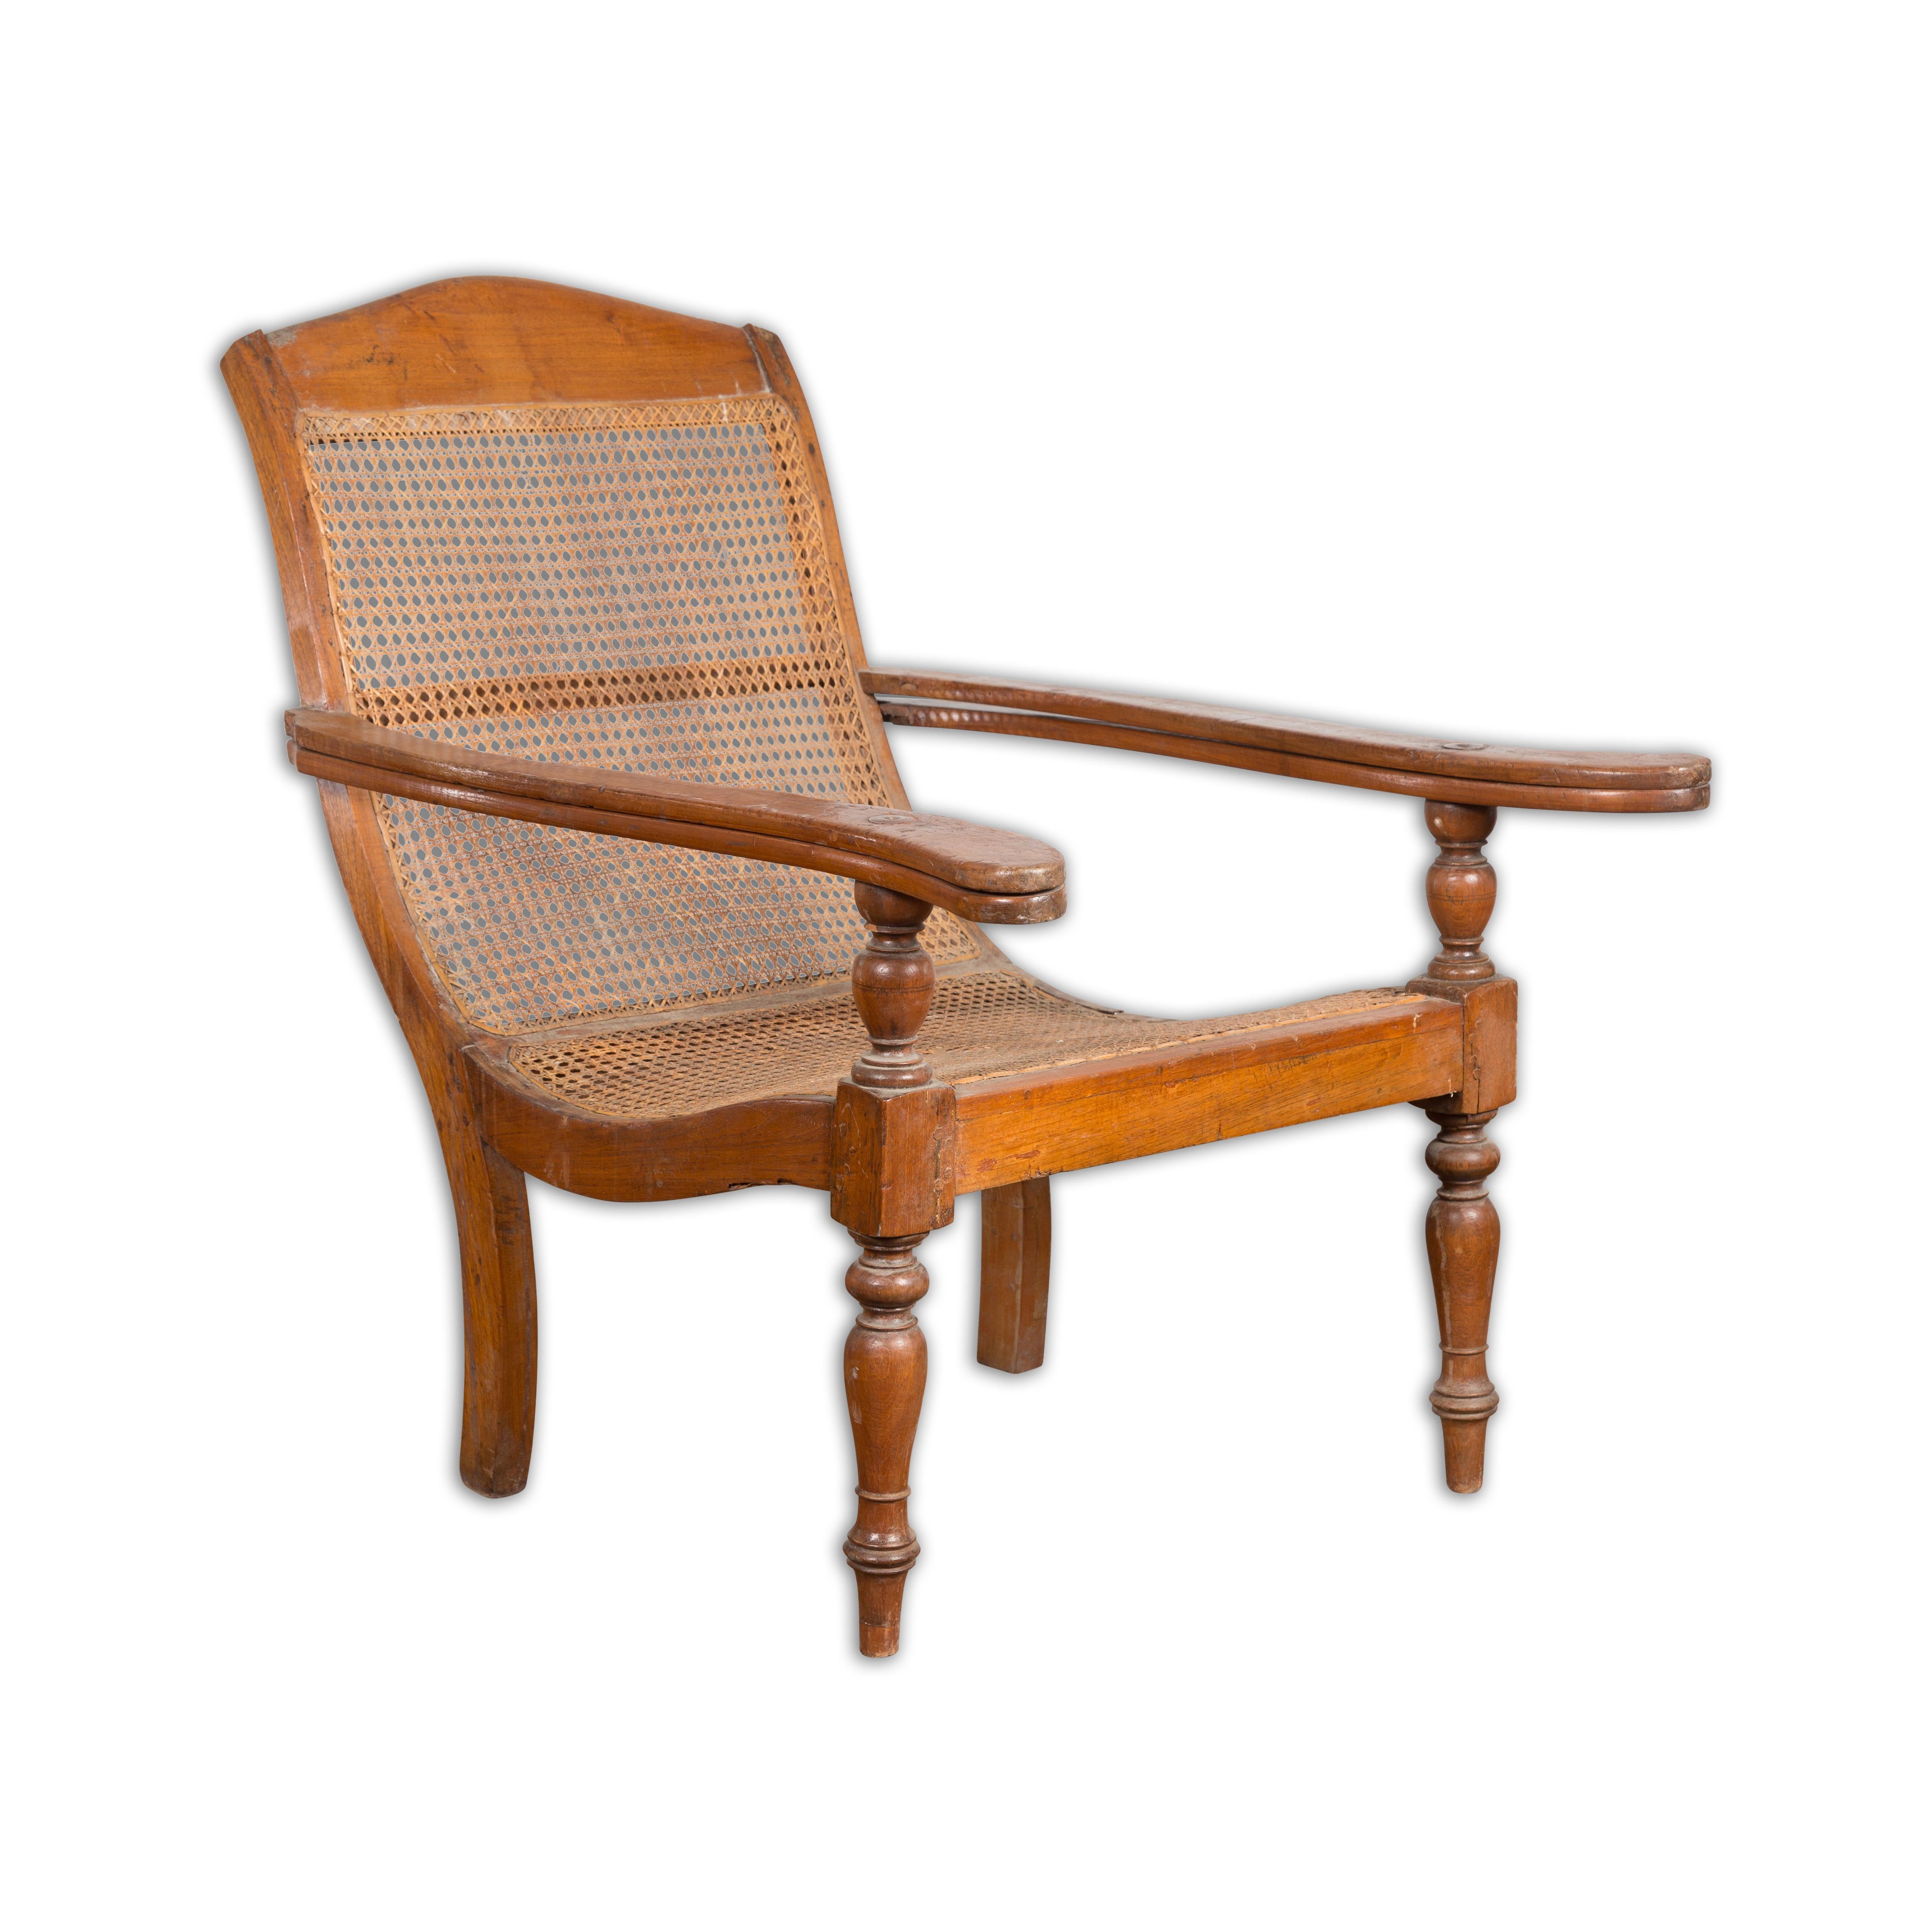 Dutch Colonial Indonesian Cane and Wood Plantation Chair with Extending Arms For Sale 14